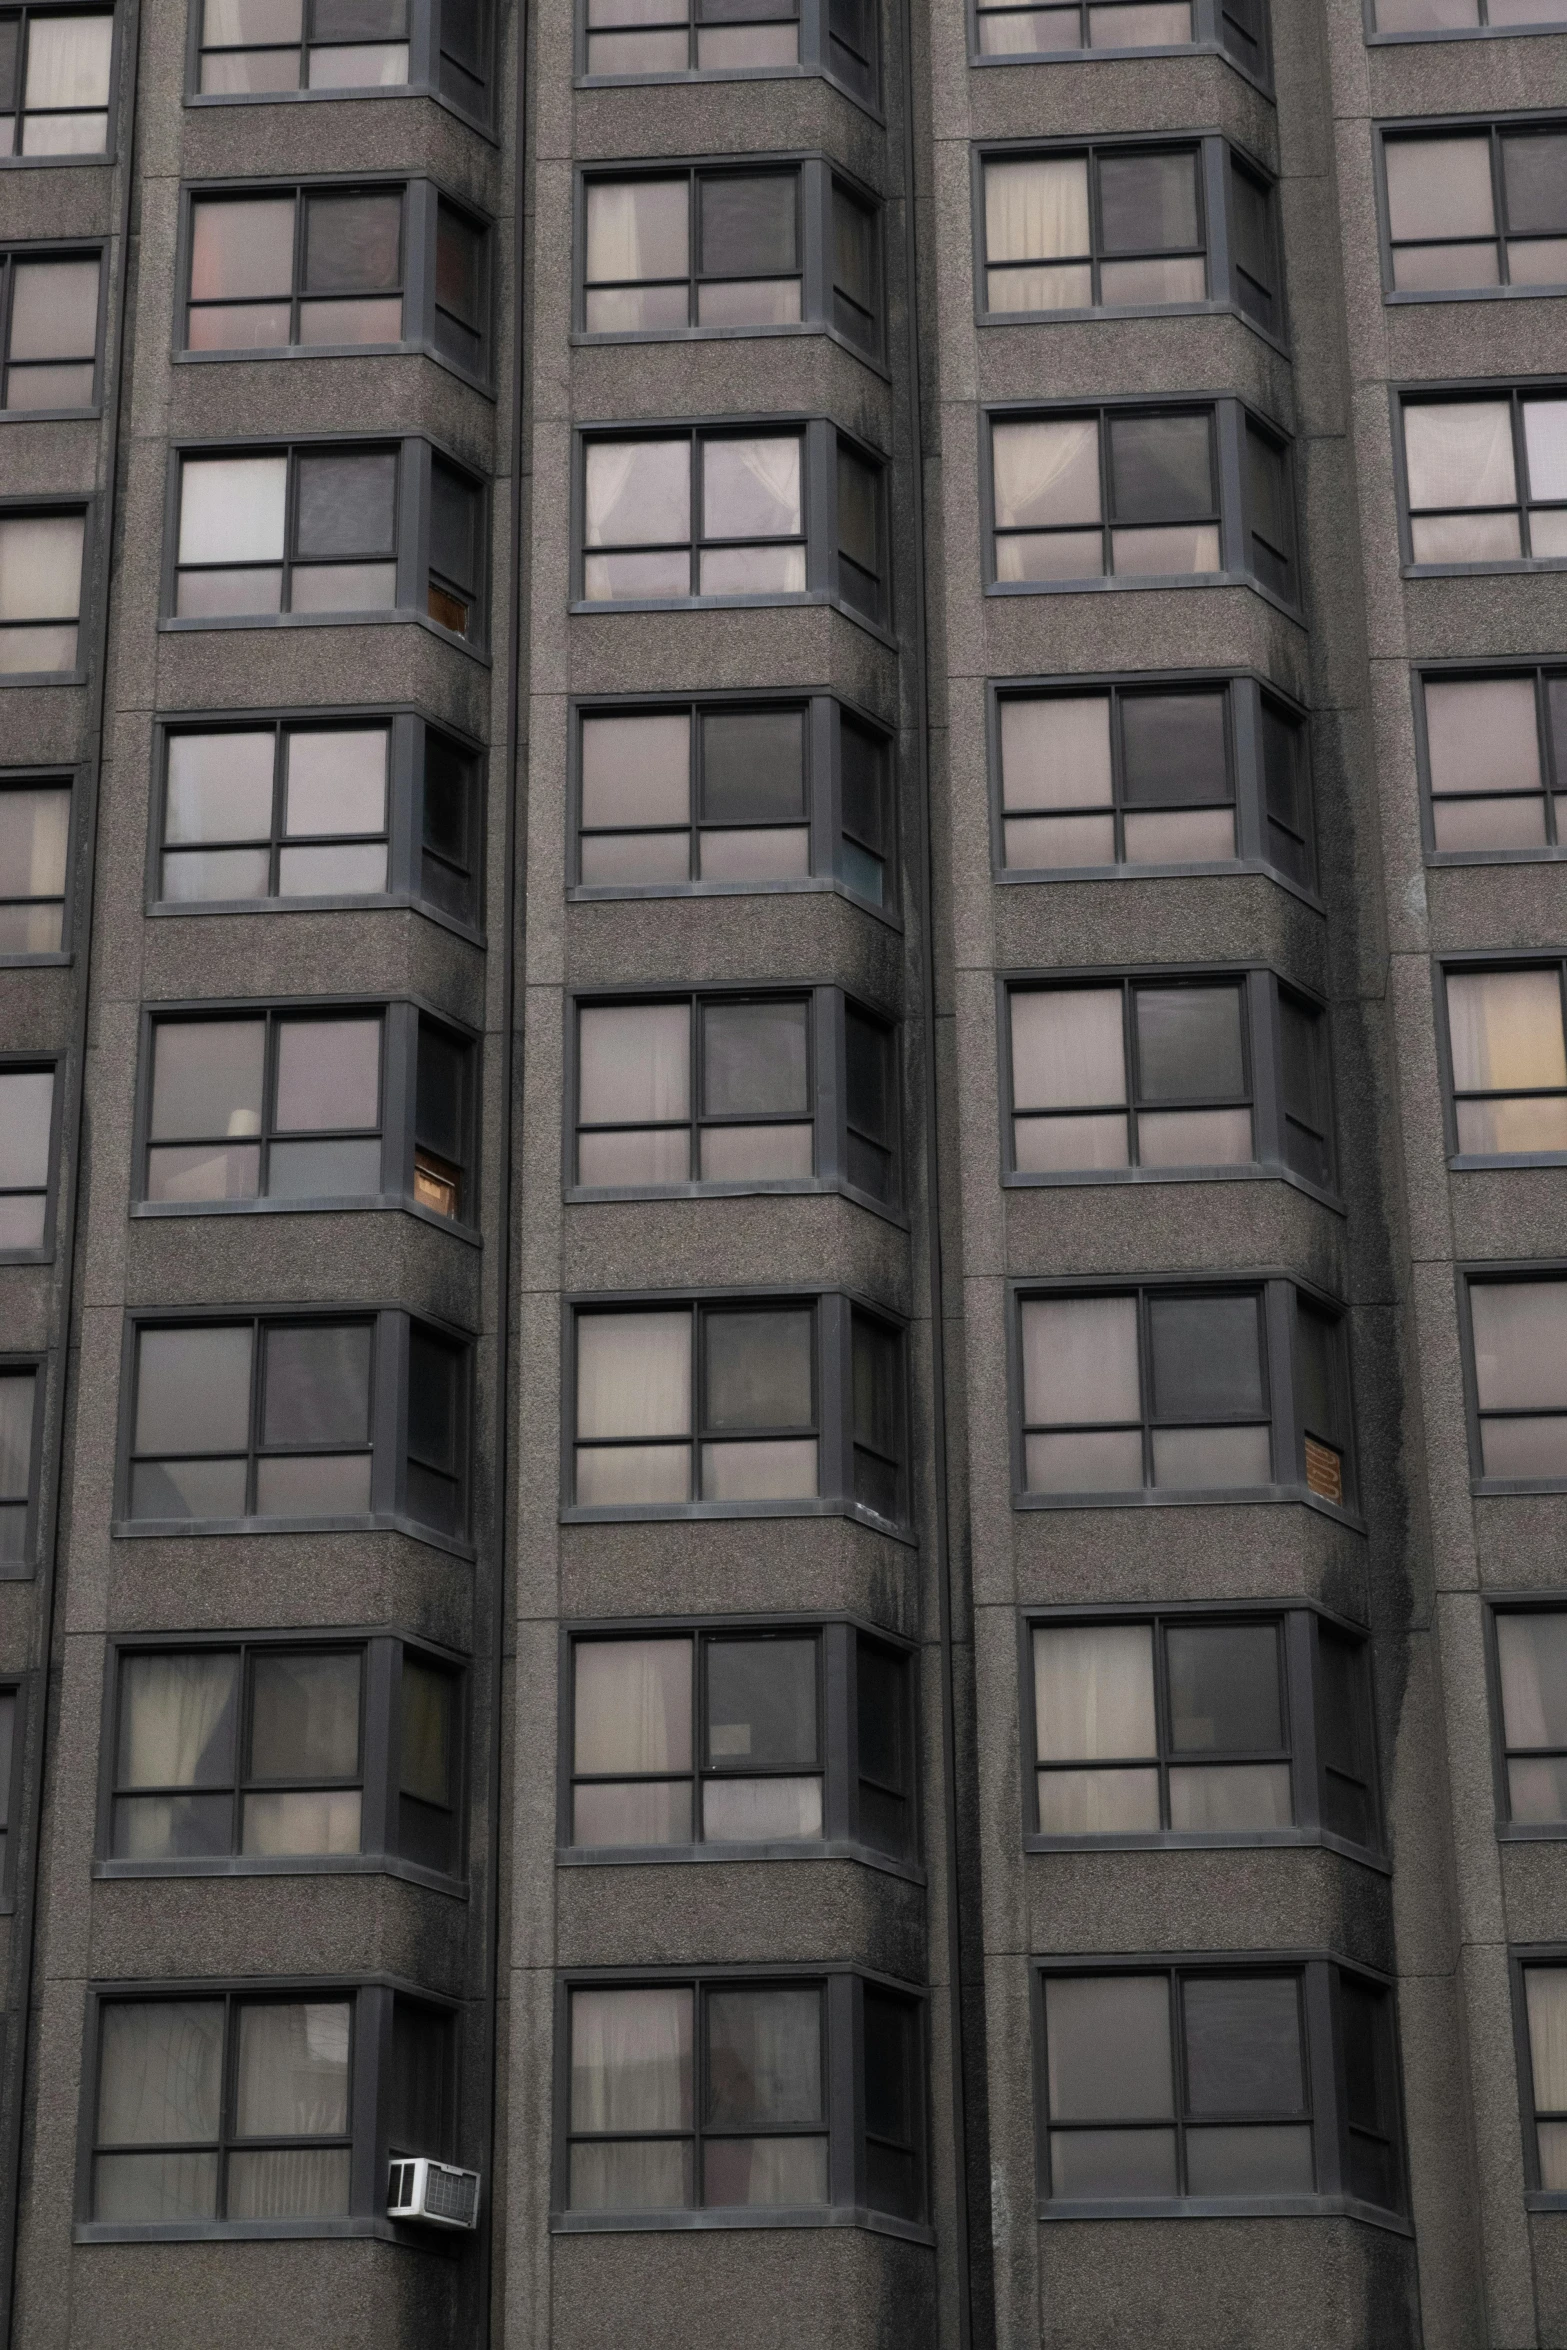 a very tall building with lots of windows, flickr, brutalism, photo of poor condition, zoomed out shot, gray men, 15081959 21121991 01012000 4k